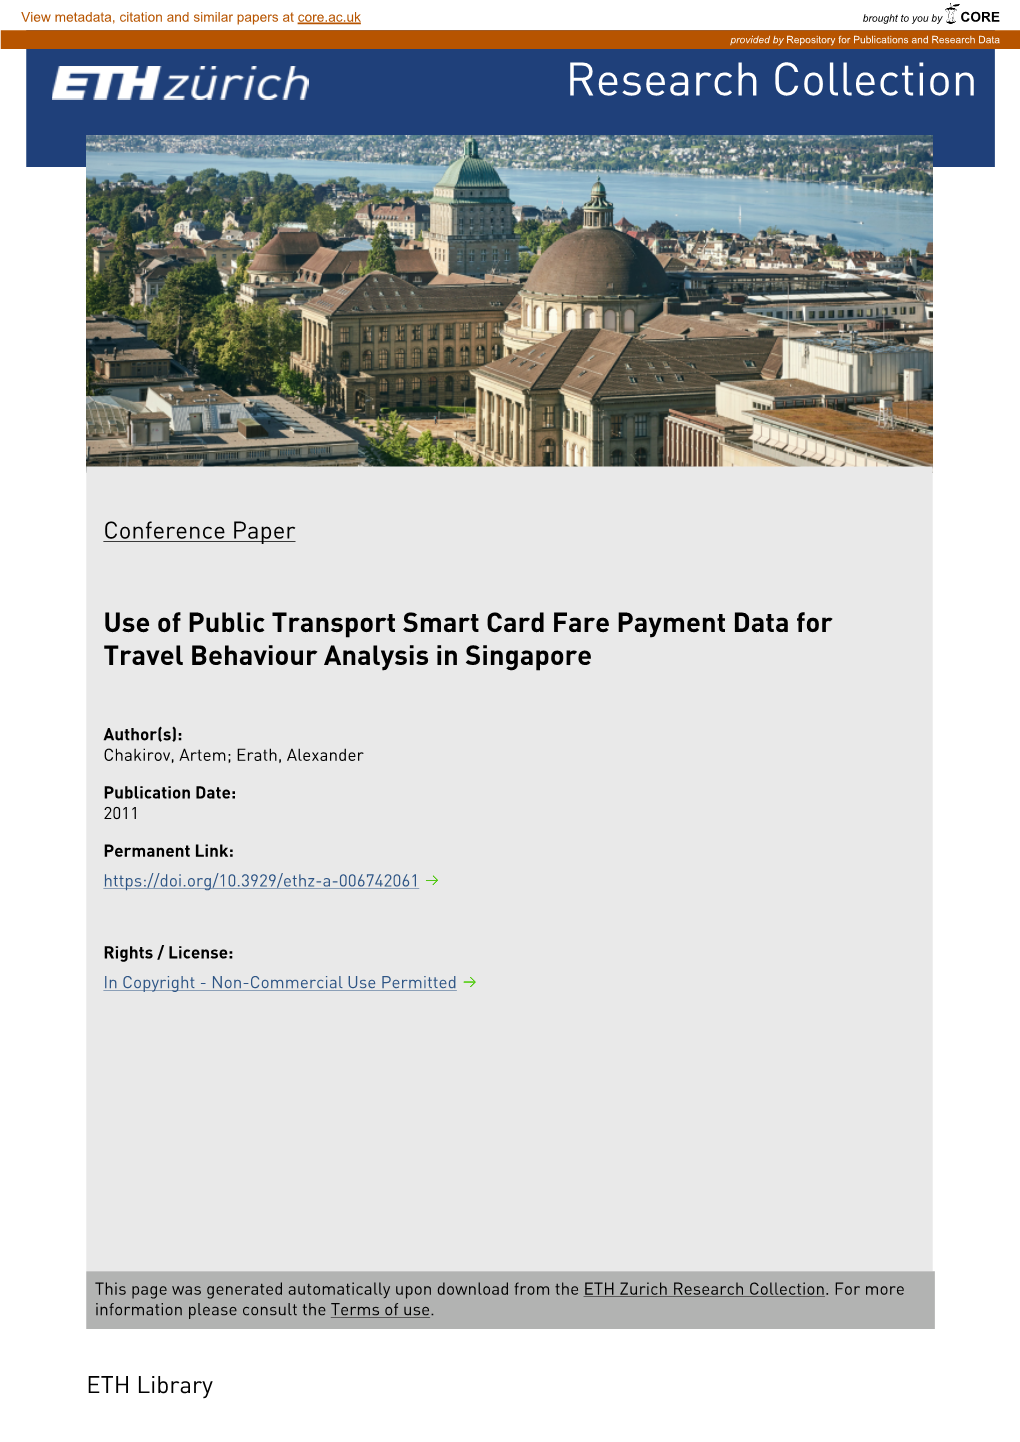 Use of Public Transport Smart Card Fare Payment Data for Travel Behaviour Analysis in Singapore